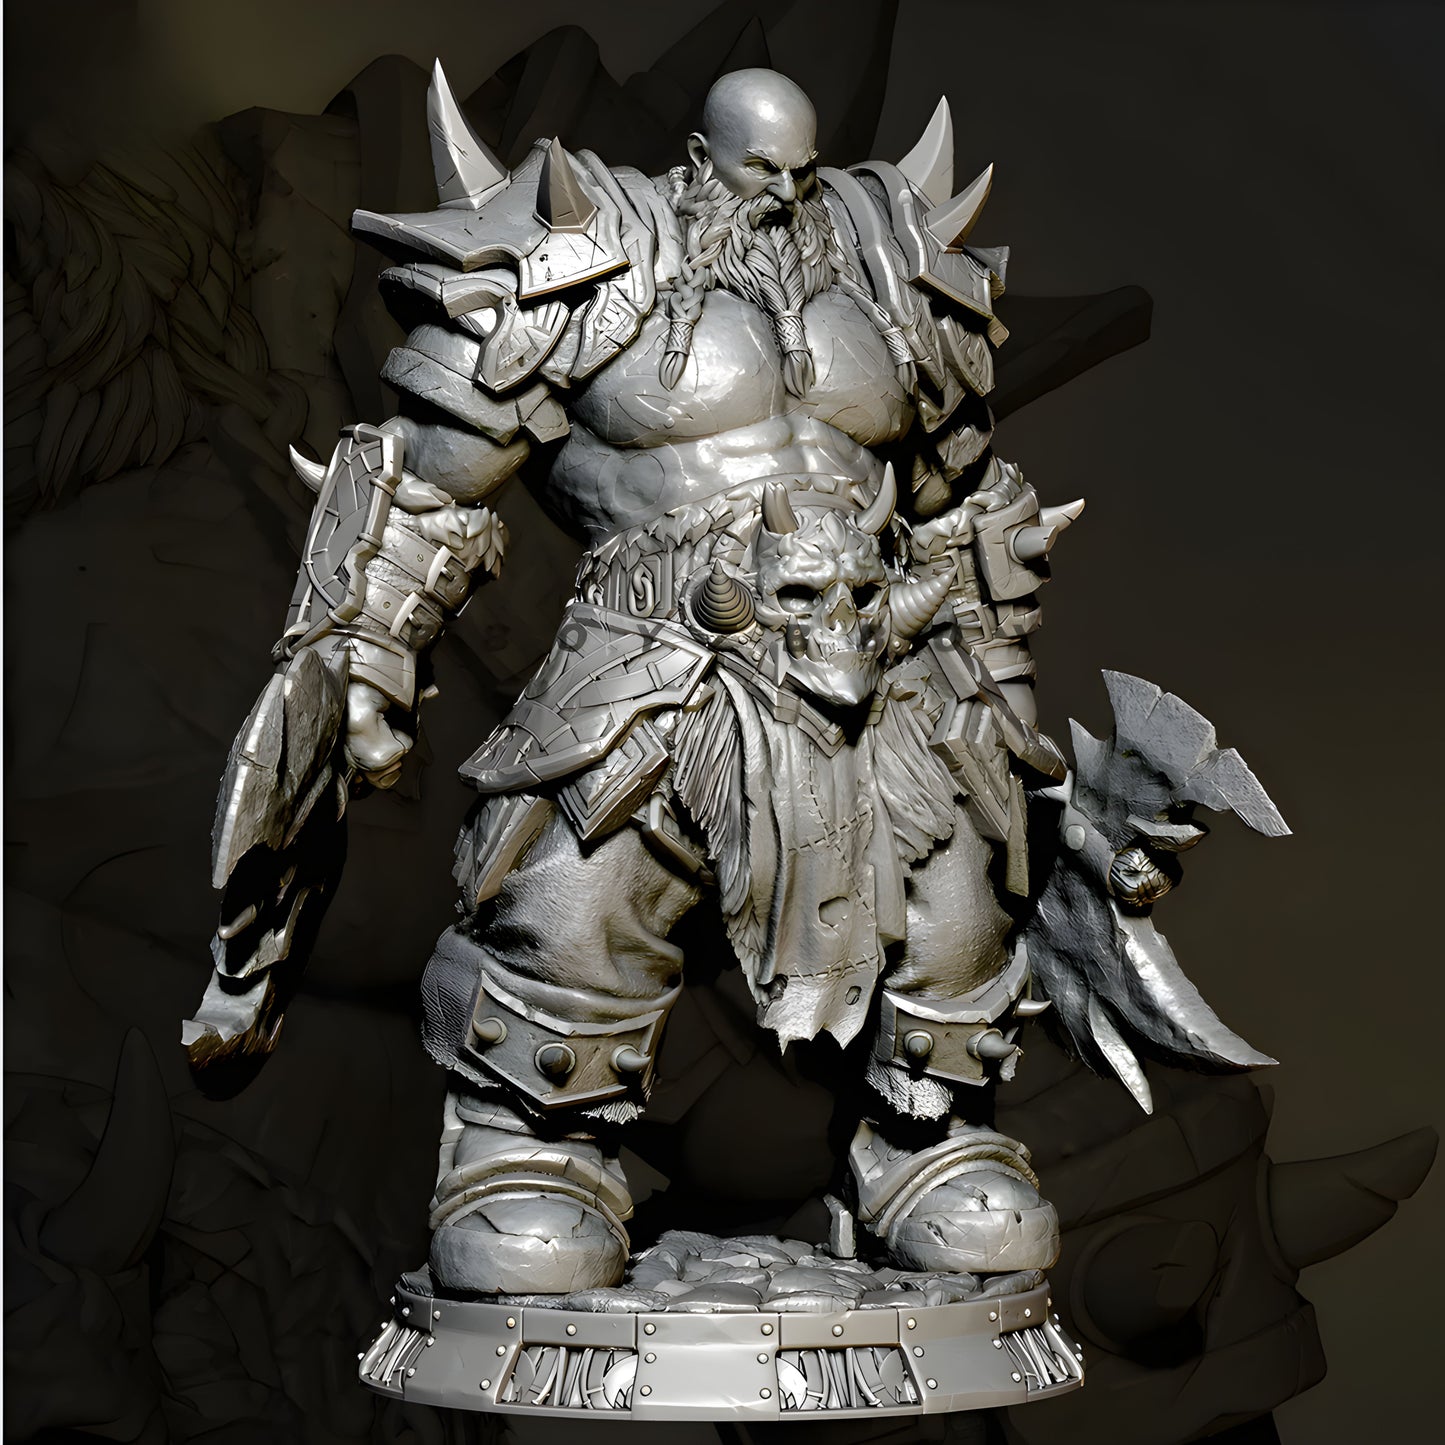 18+ Collector's 3D Printed Model: 50mm 75mm Resin model kits figure colorless and self-assembled TD-4249